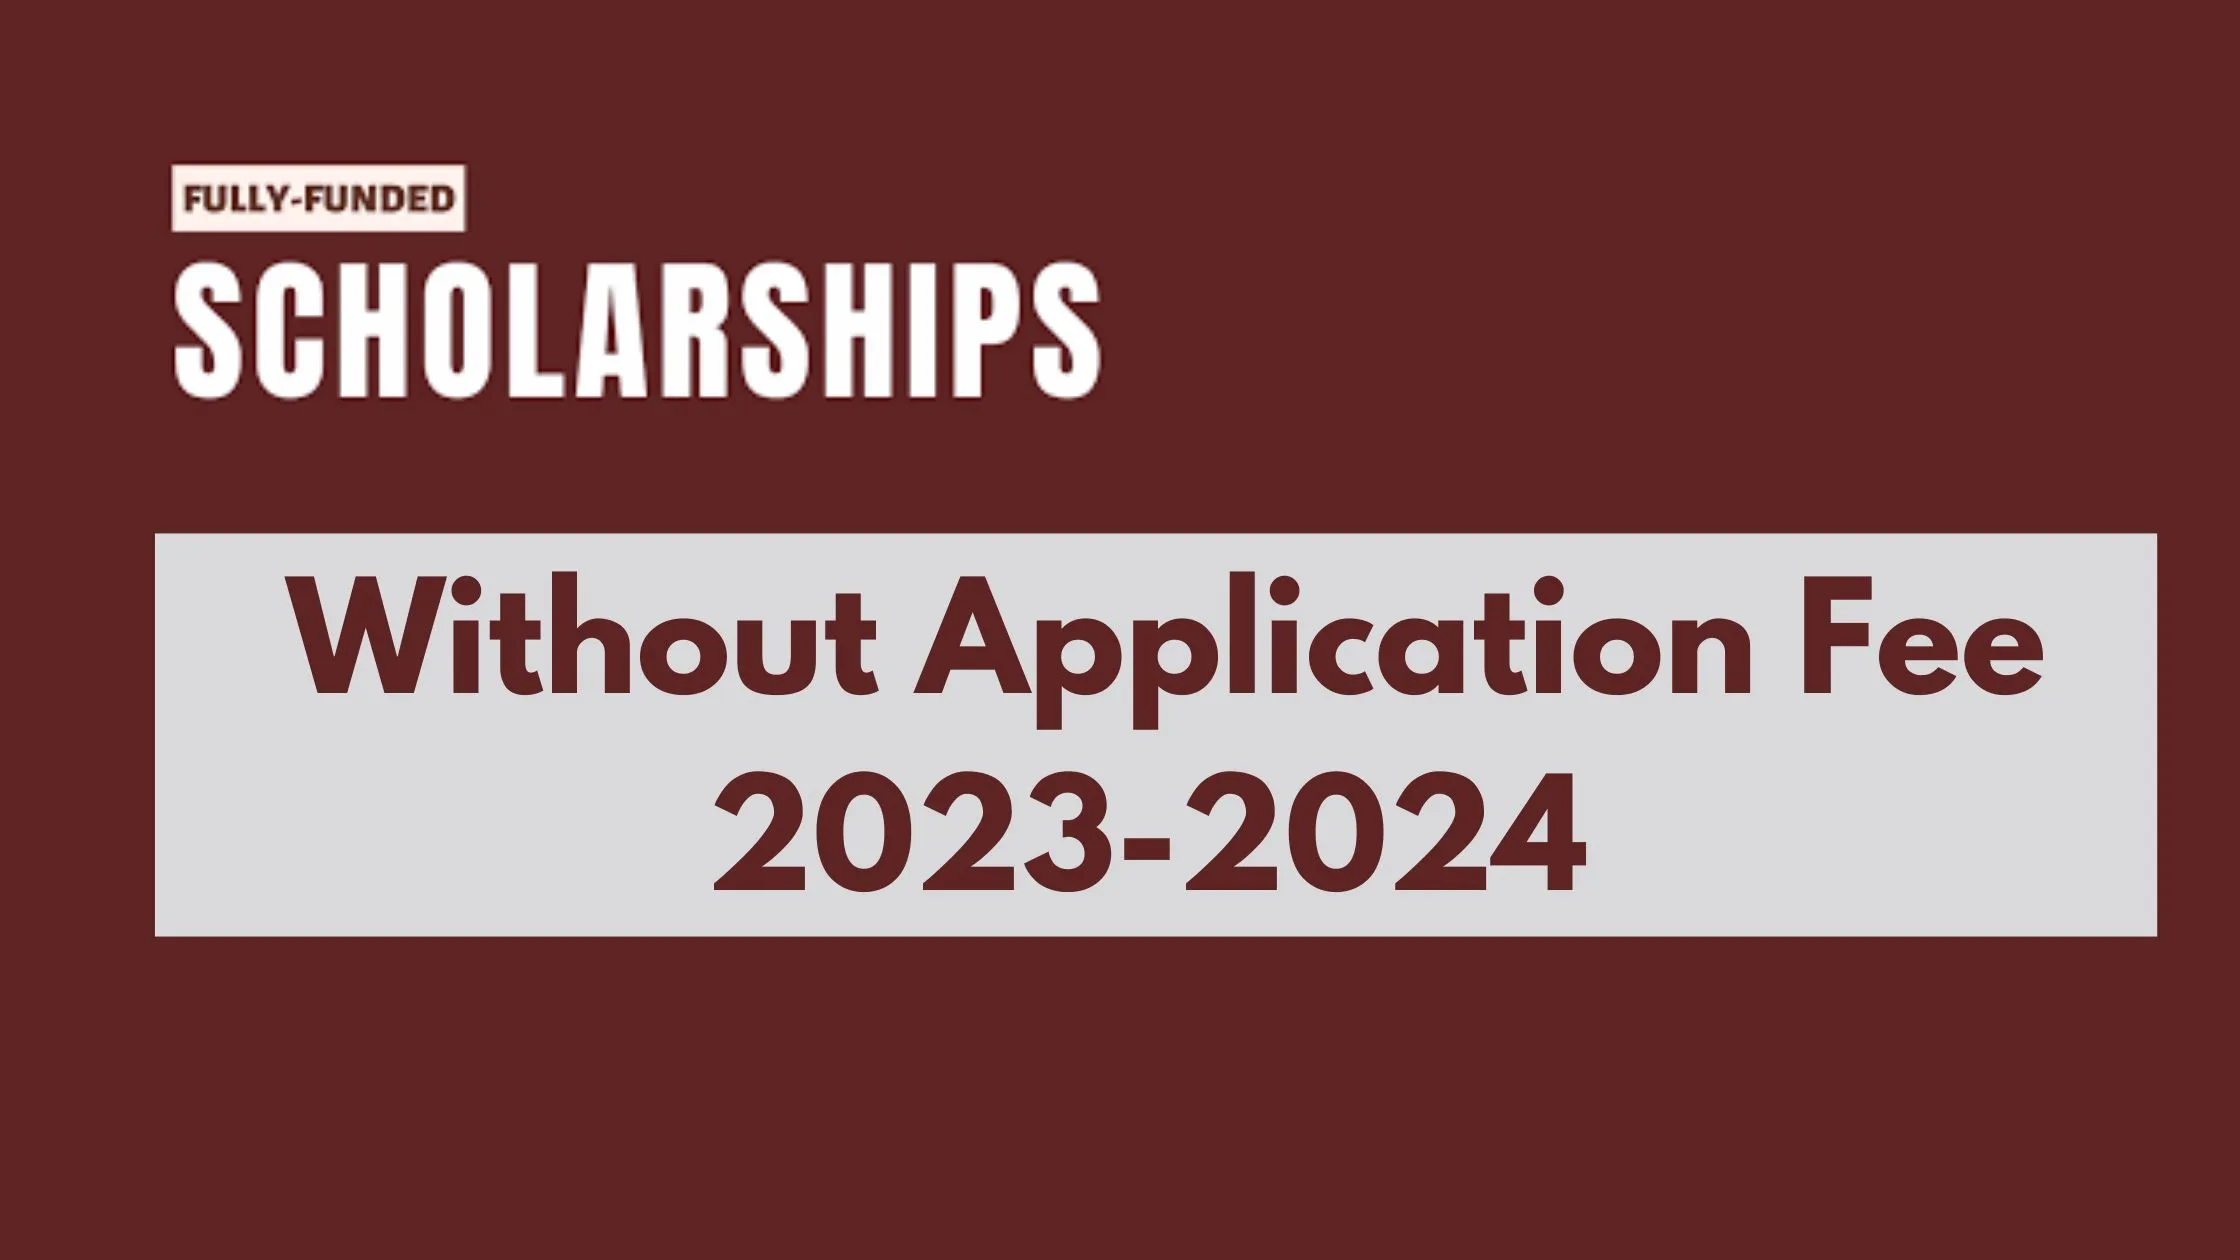 Fully Funded Scholarships Without Application Fee 2023-2024